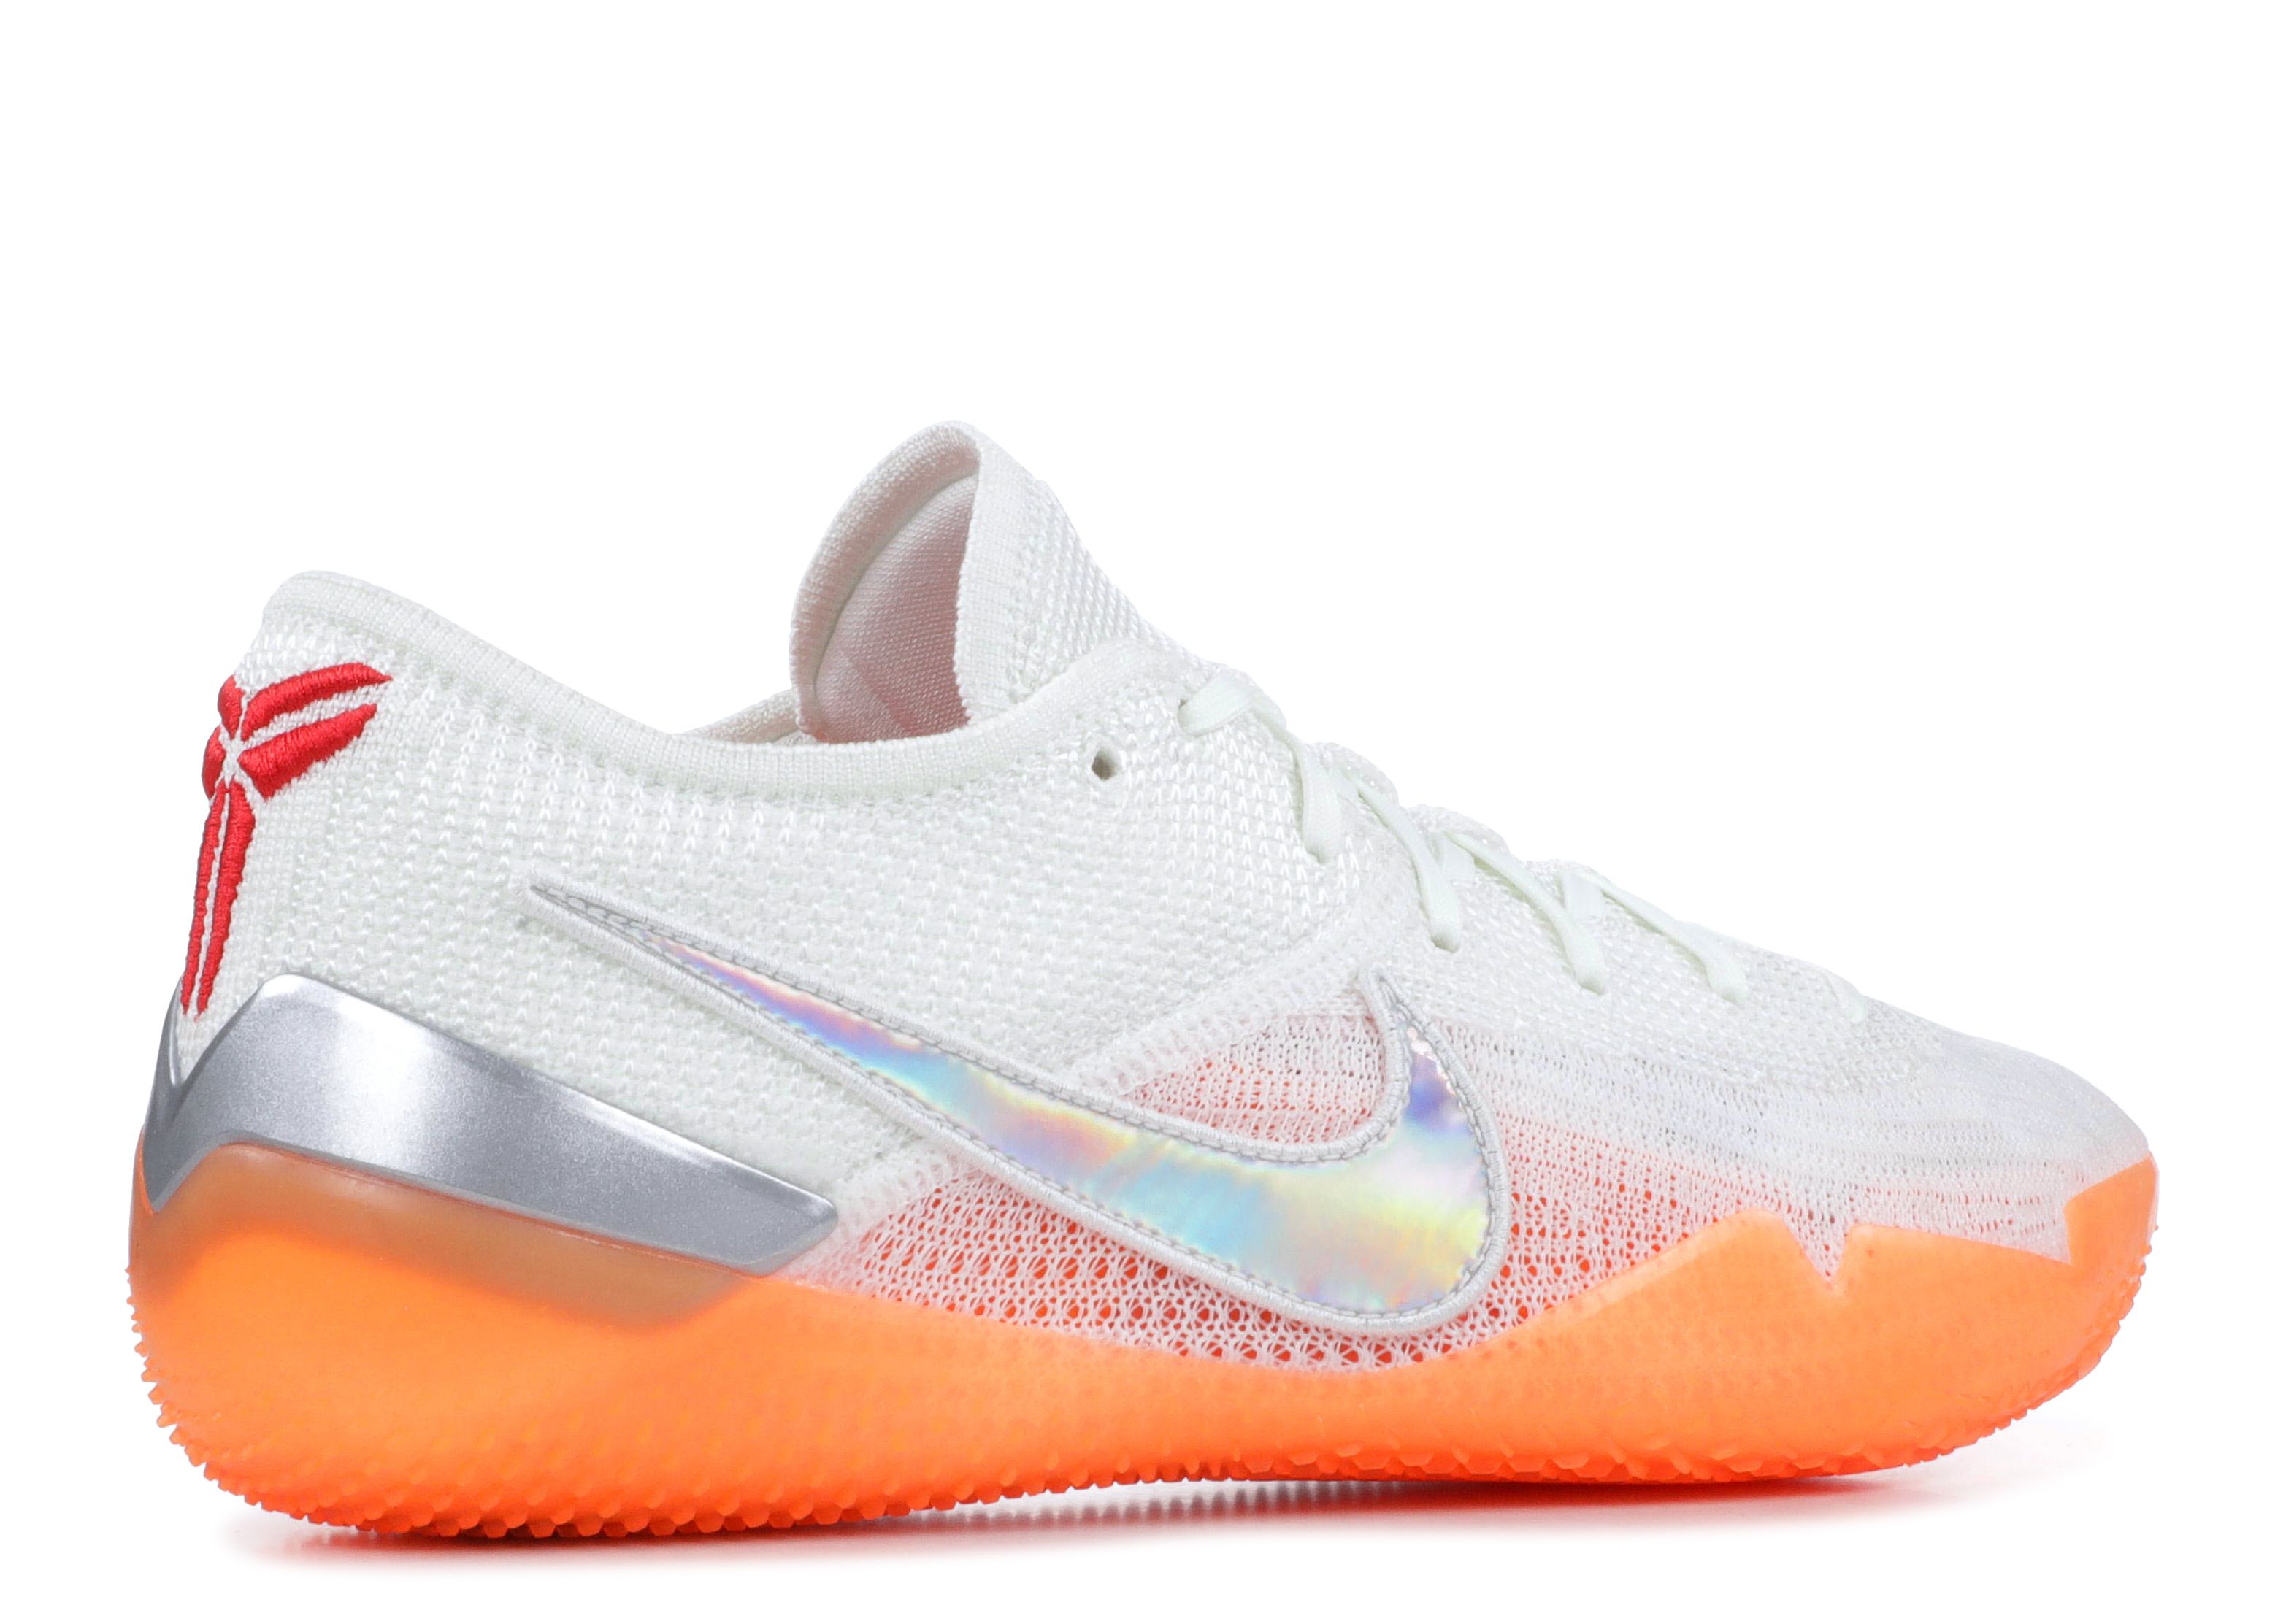 nike kobe ad nxt 360 white/multicolor-infrared 23